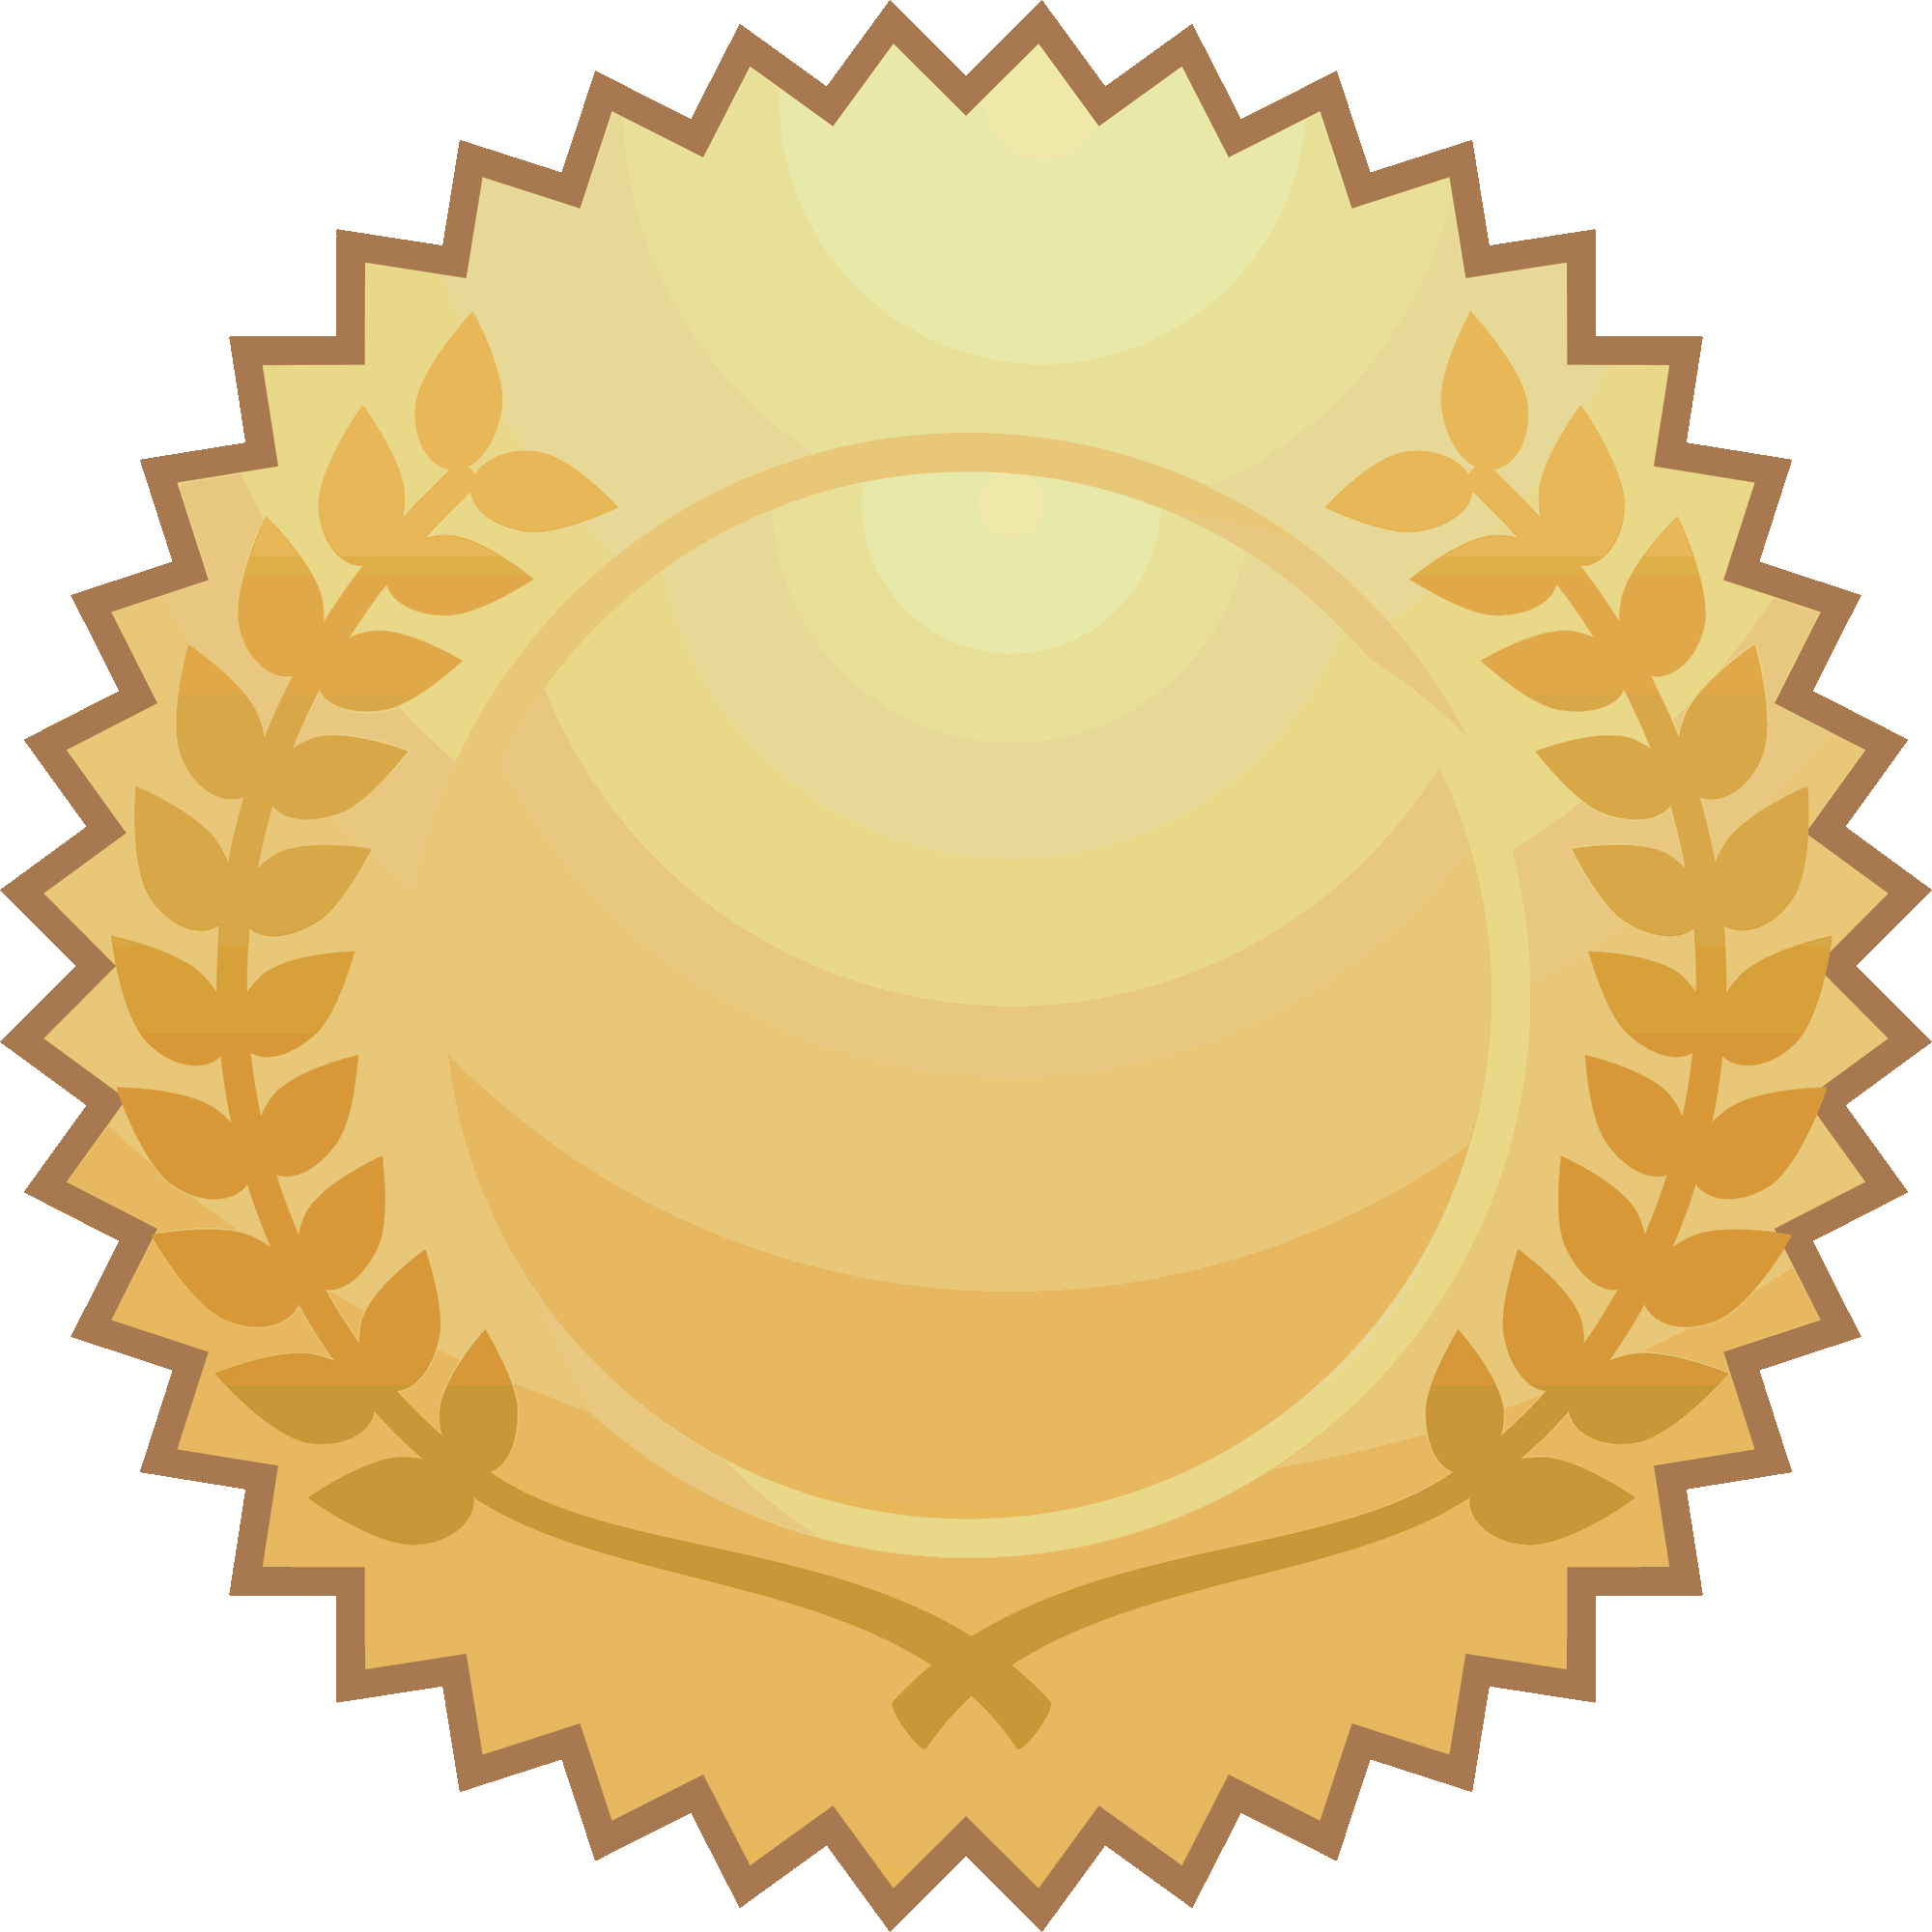 Gold Medal PNG Picture